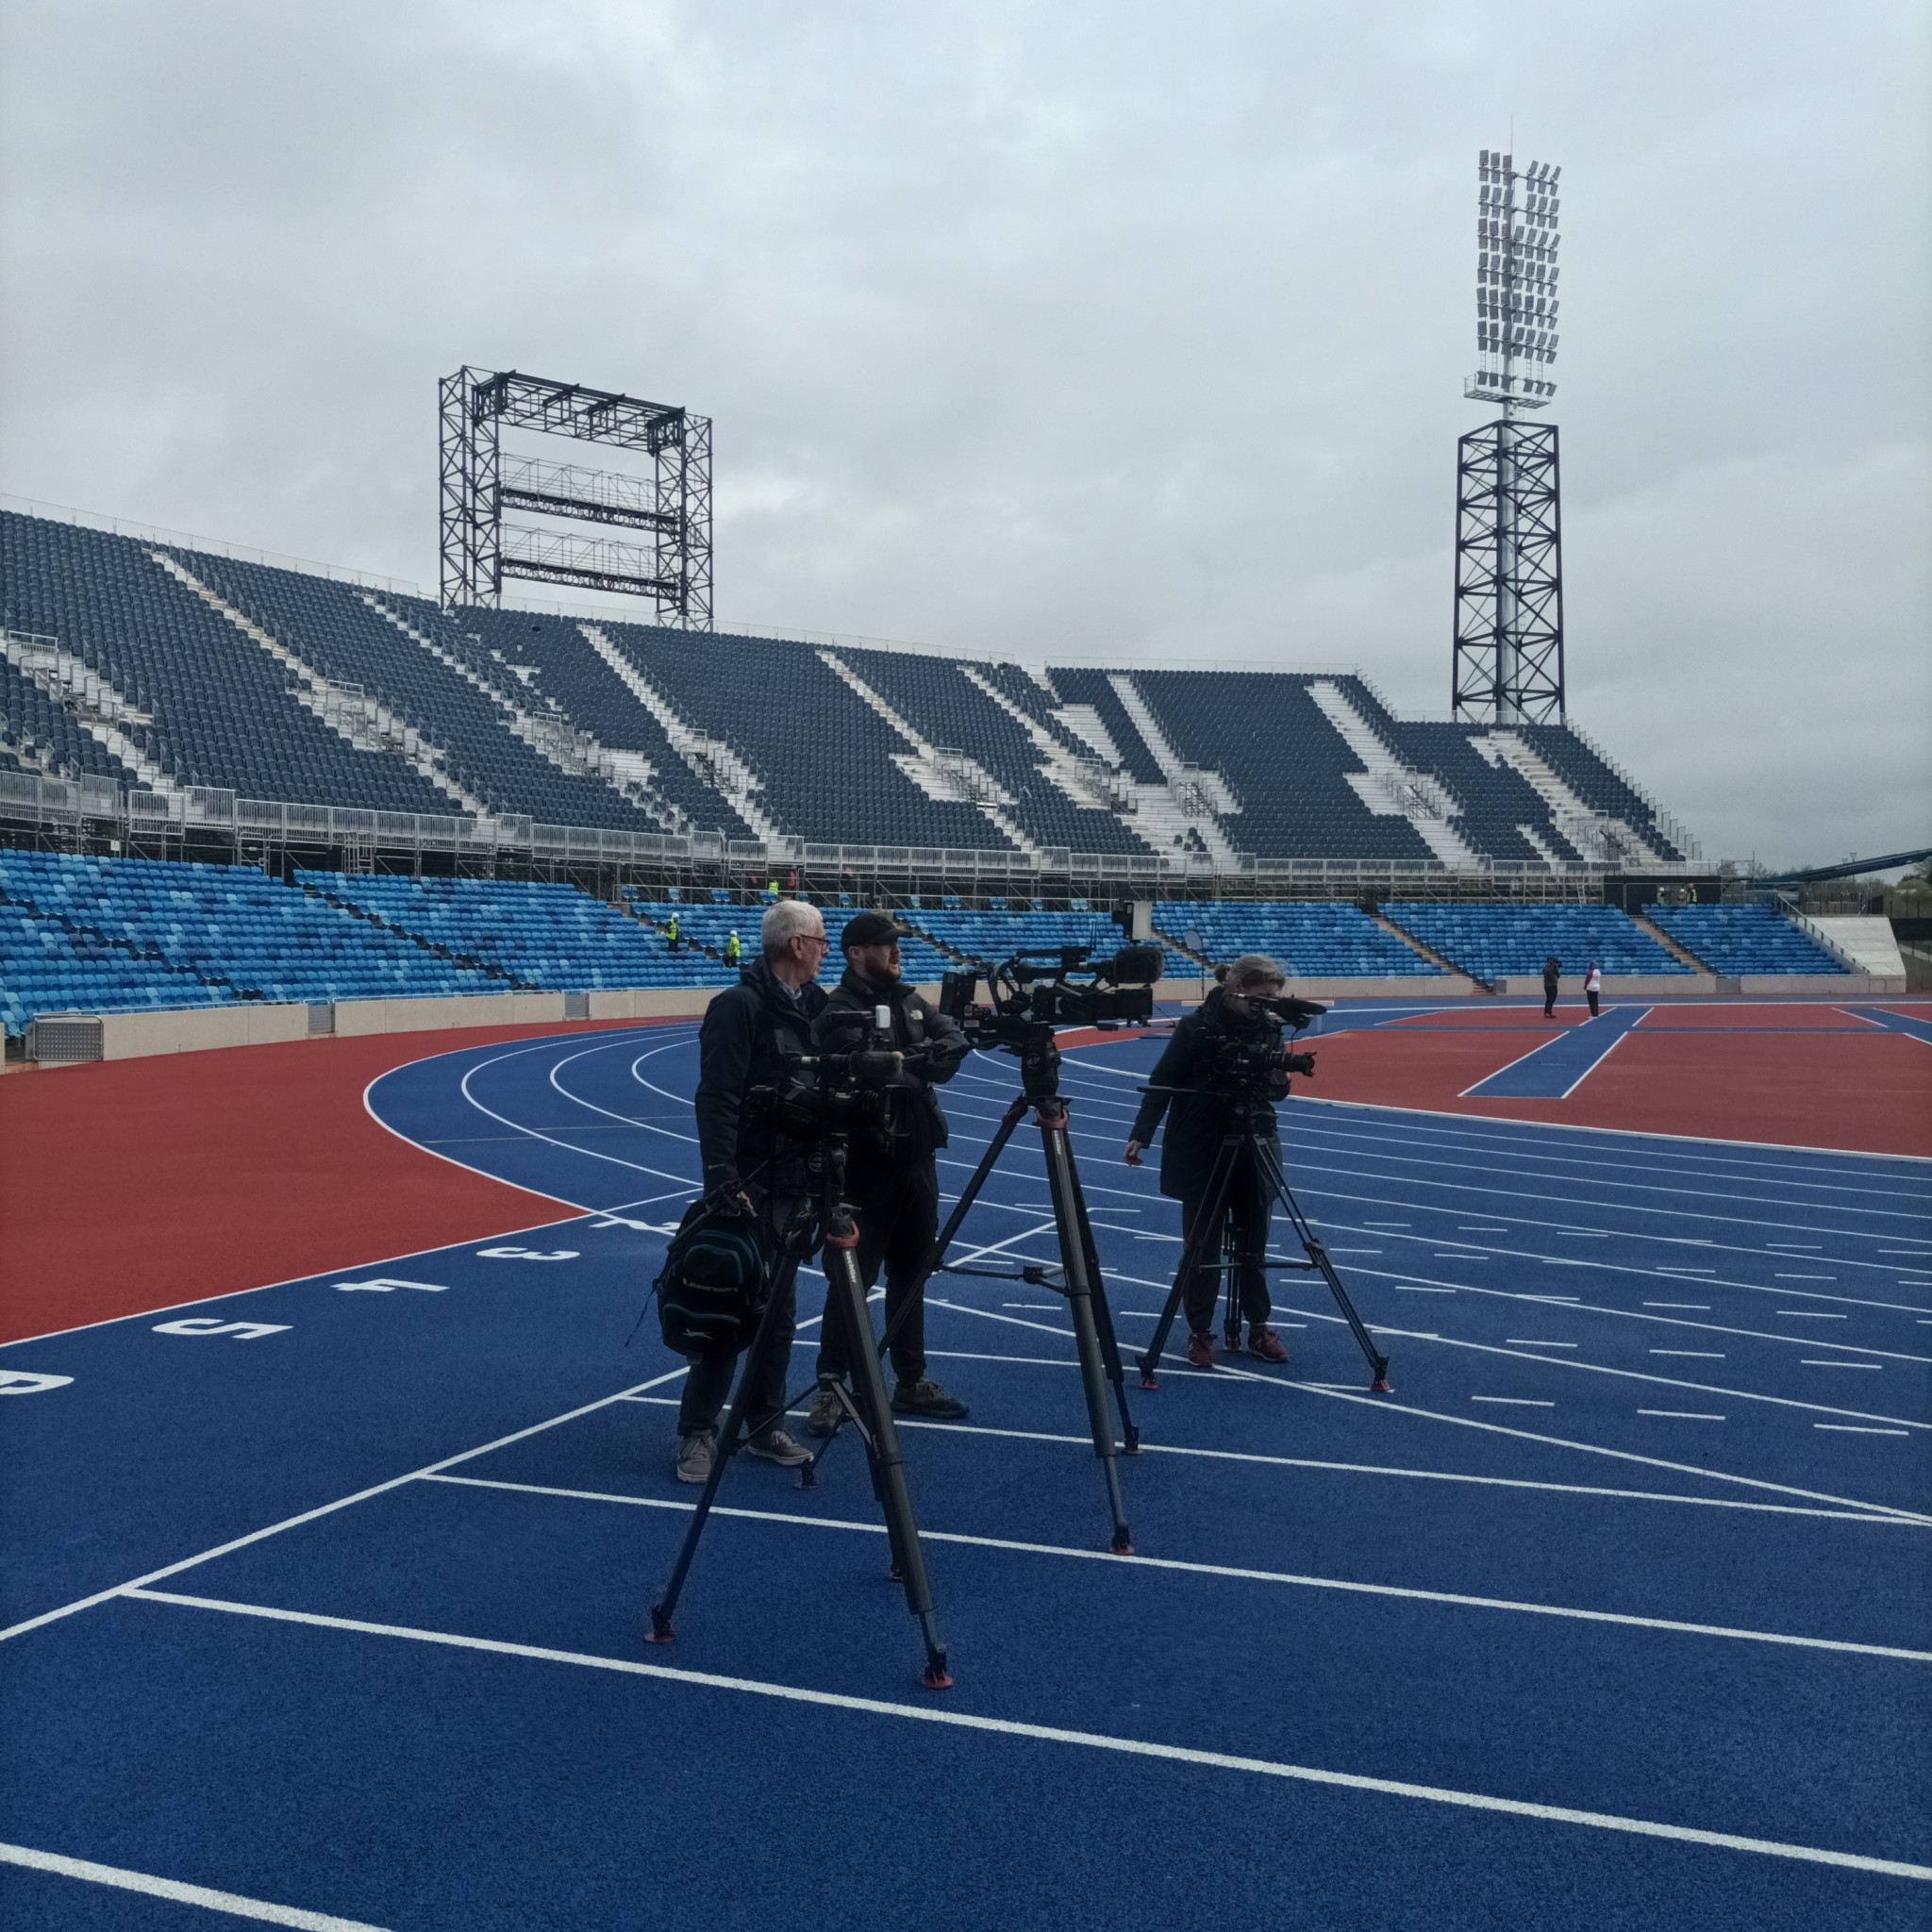 The Alexander Stadium was renovated as part of a £72 million construction programme for the Commonwealth Games ©ITG